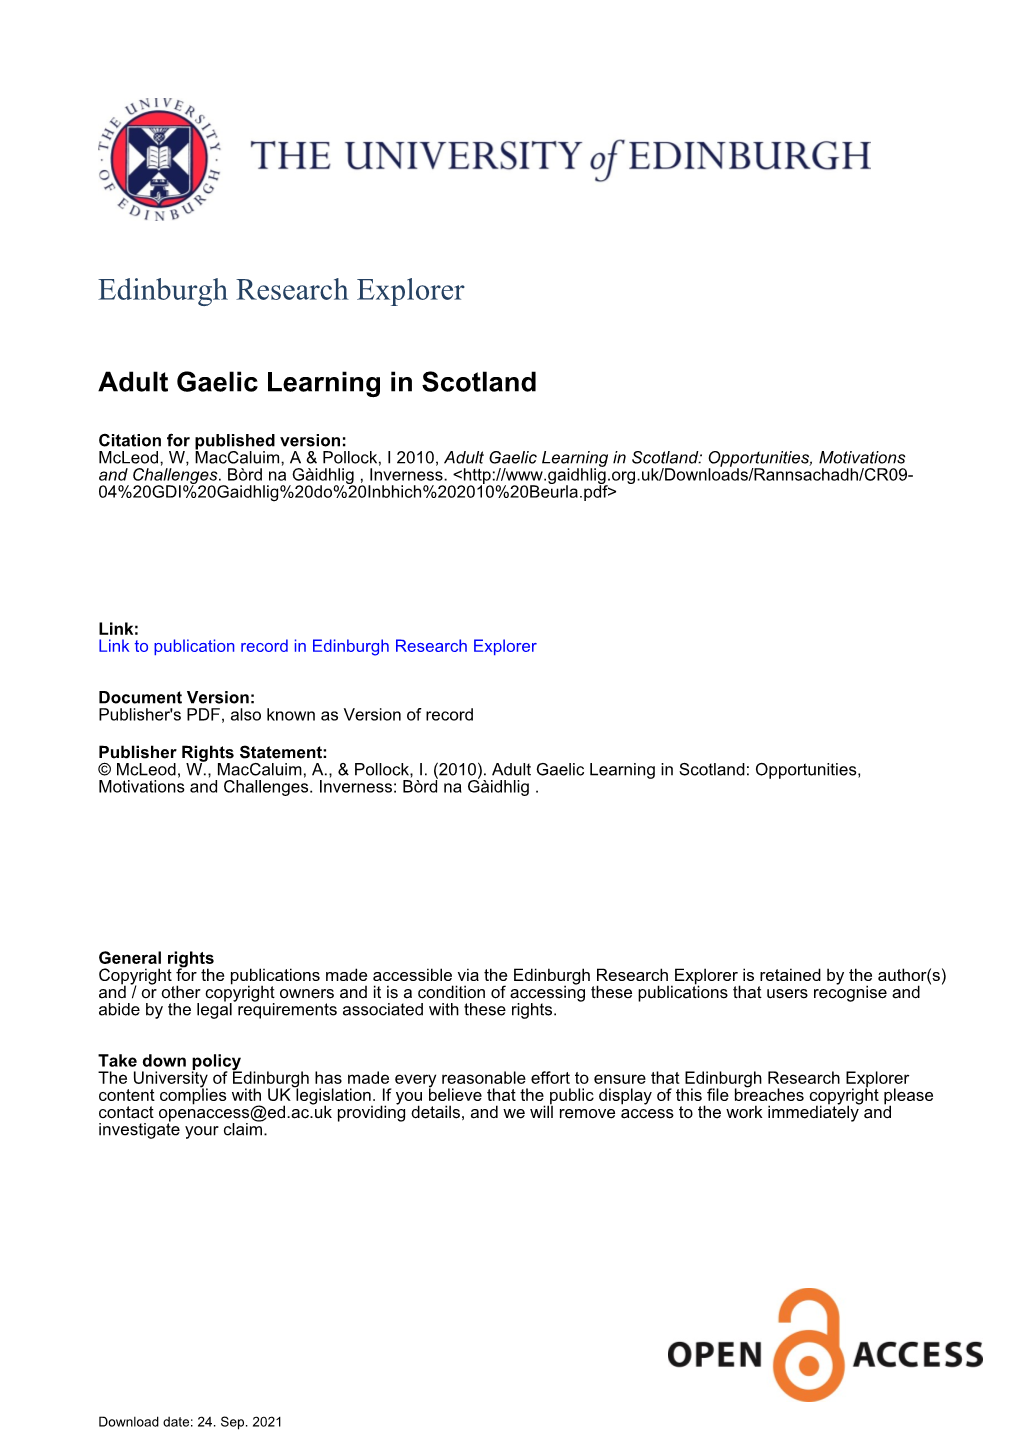 Adult Gaelic Learning in Scotland